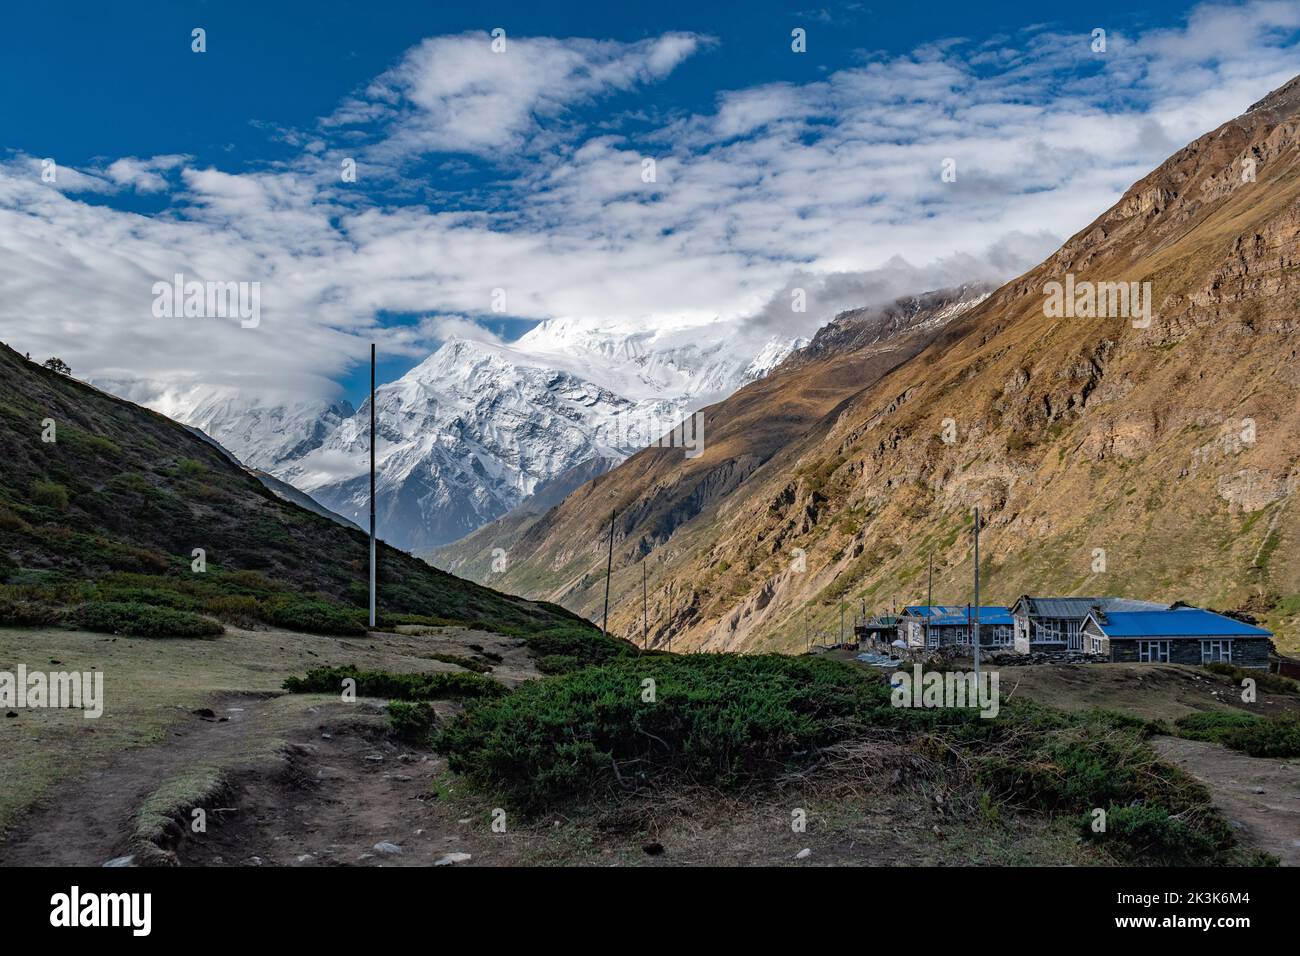 Beautiful village in the Annapurna mountains in Nepal Stock Photo